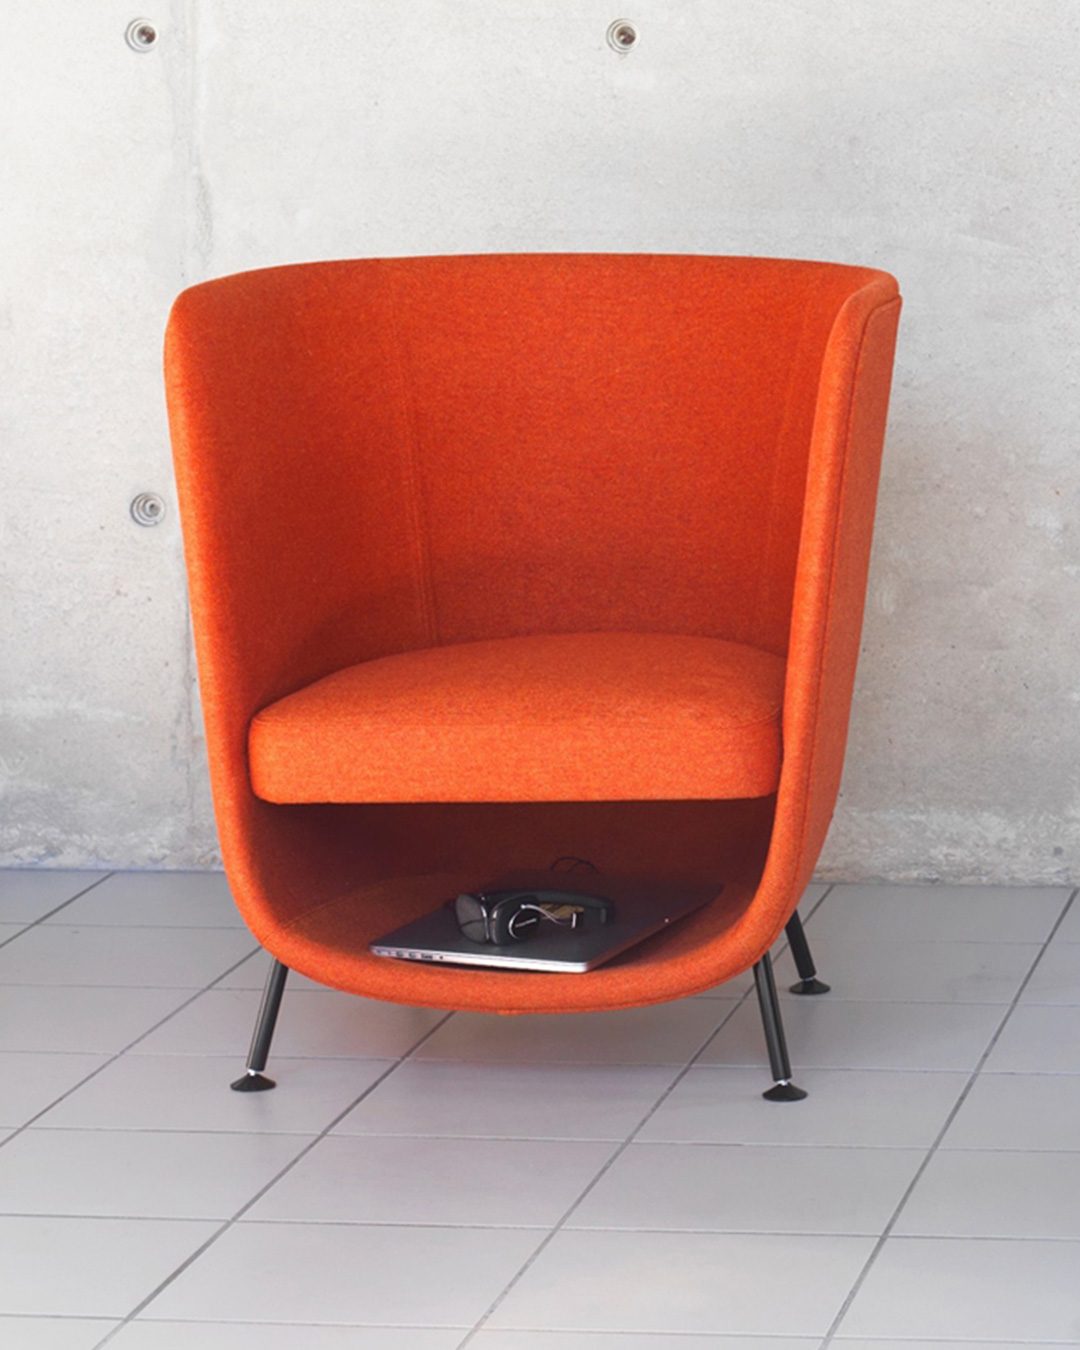 Pocket chair in orange, design furniture for cats and humans with place to cocoon